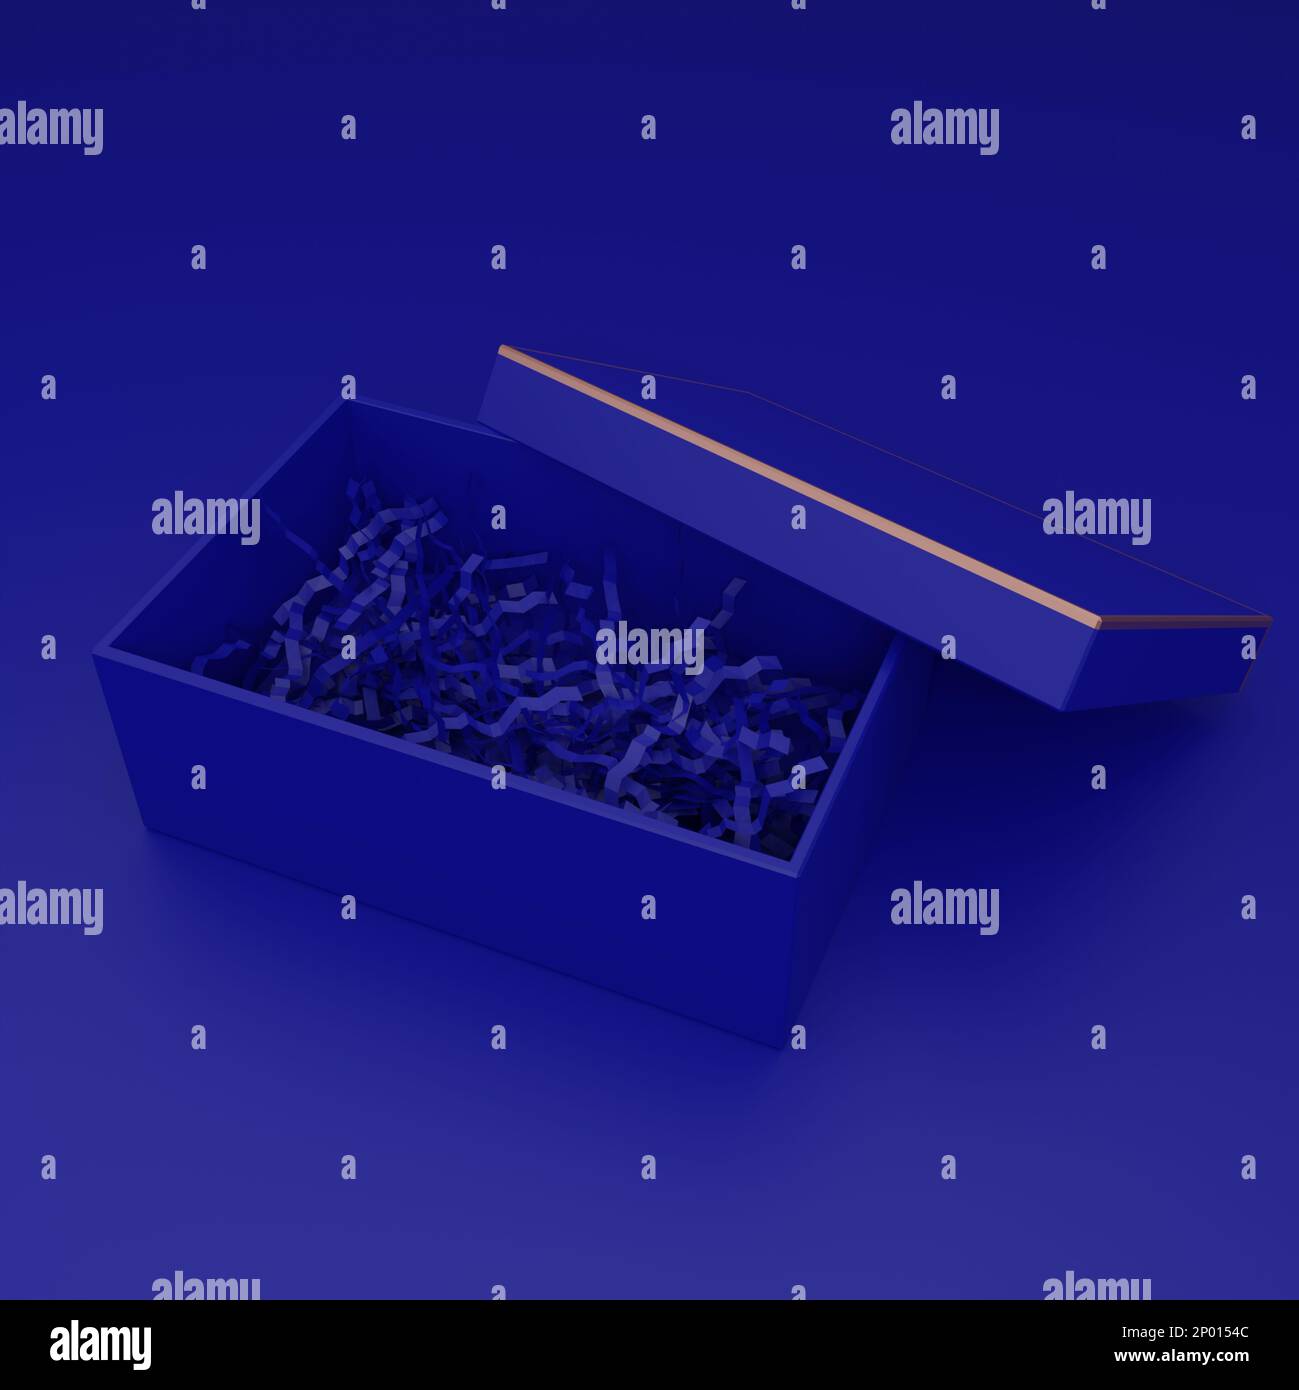 3D Rendering Festive Empty Blue Carton Packaging Box for Snack, Beauty, Skincare or Toiletries Product Display. Stock Photo